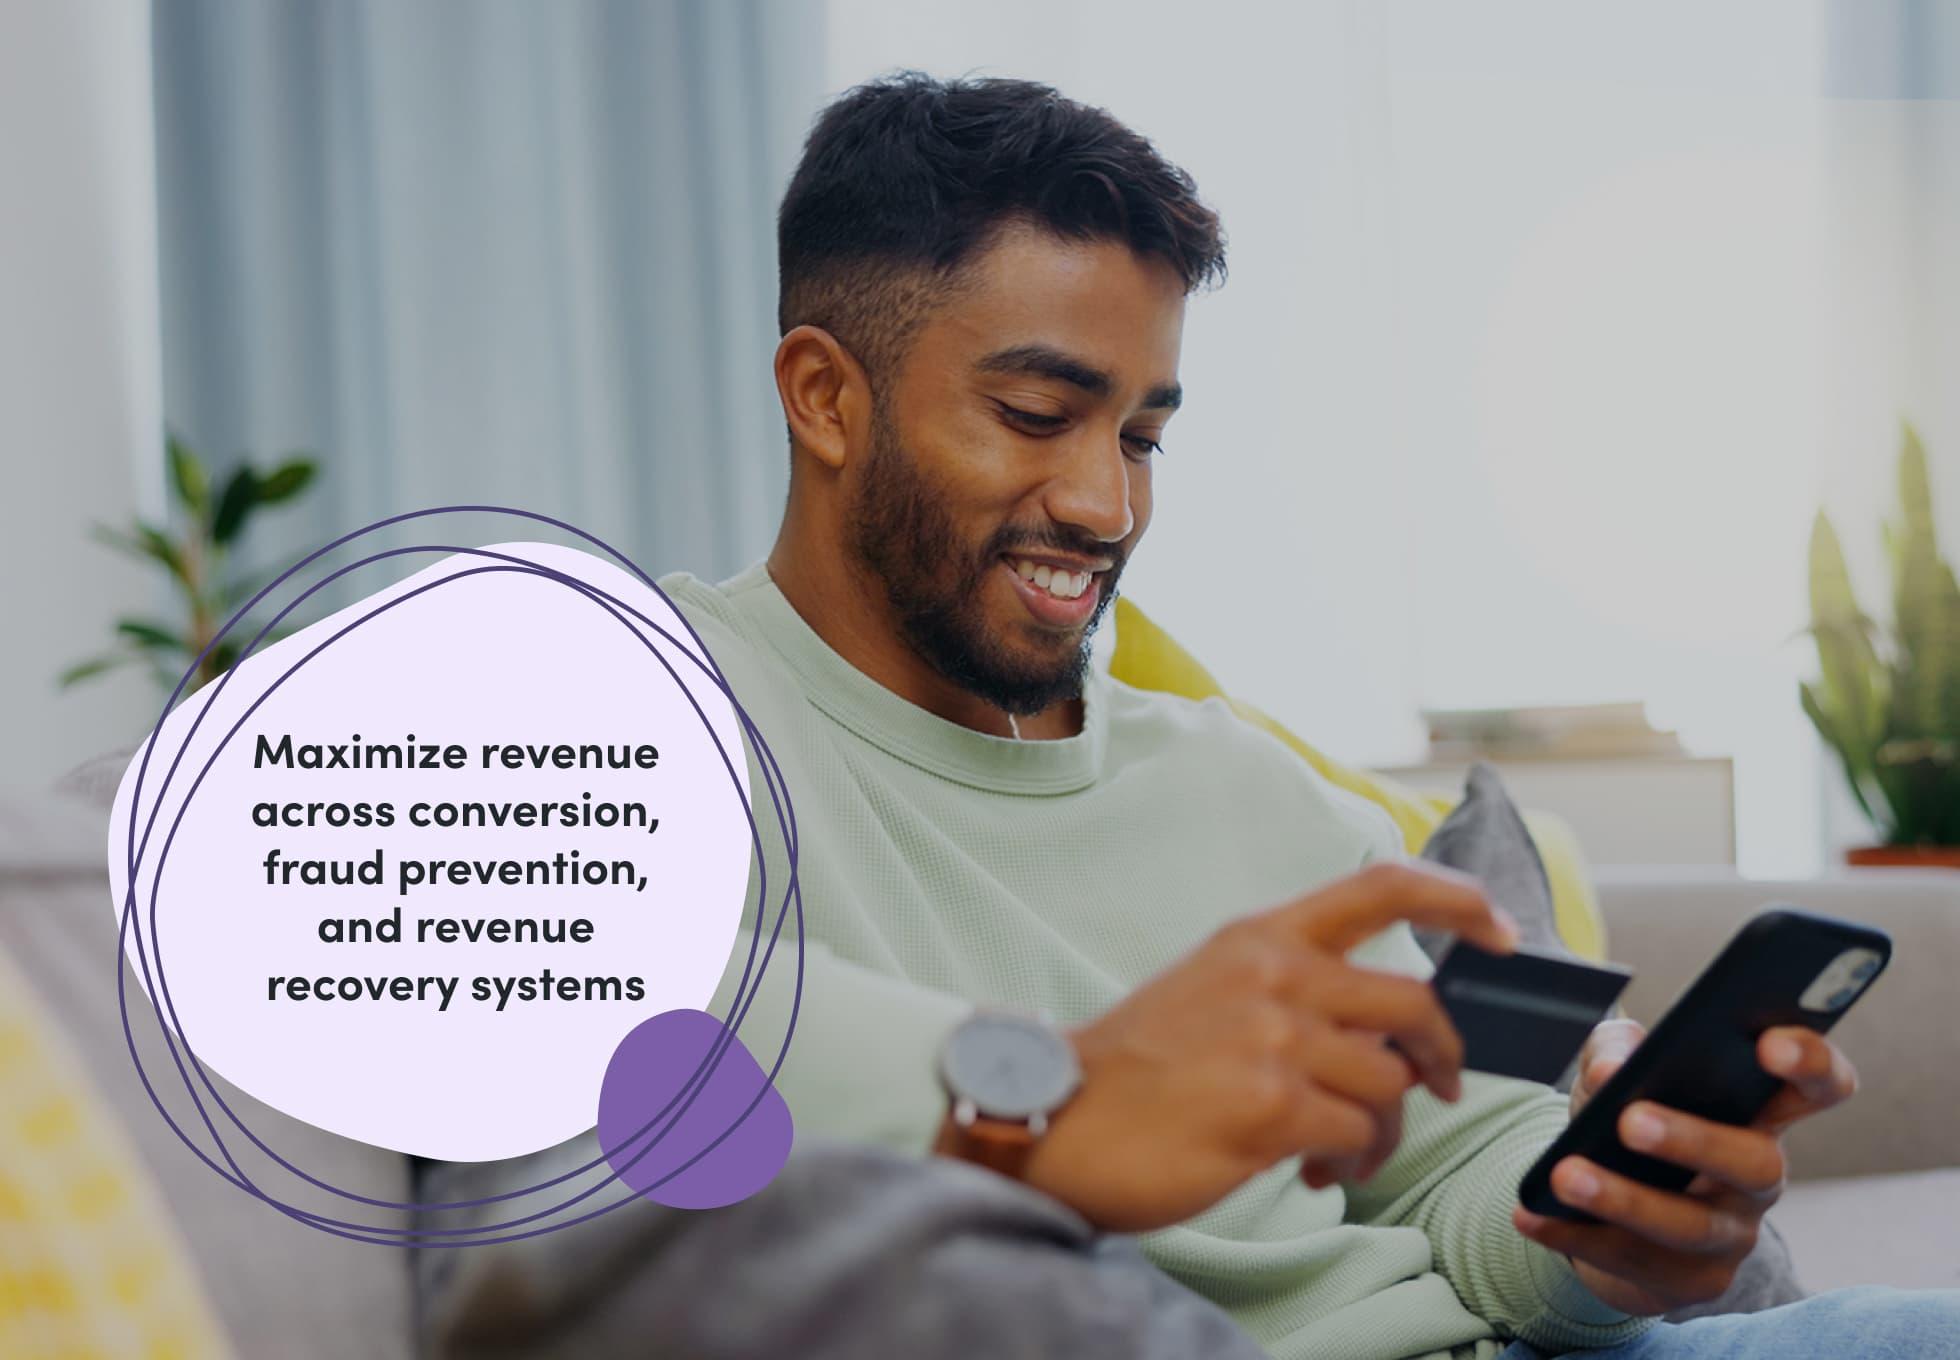 A person sitting on a couch and smiling with a cellphone in one hand and a credit card in the other. Overtop this image says "Maximize revenue across conversion, fraud prevention, and revenue recovery systems."